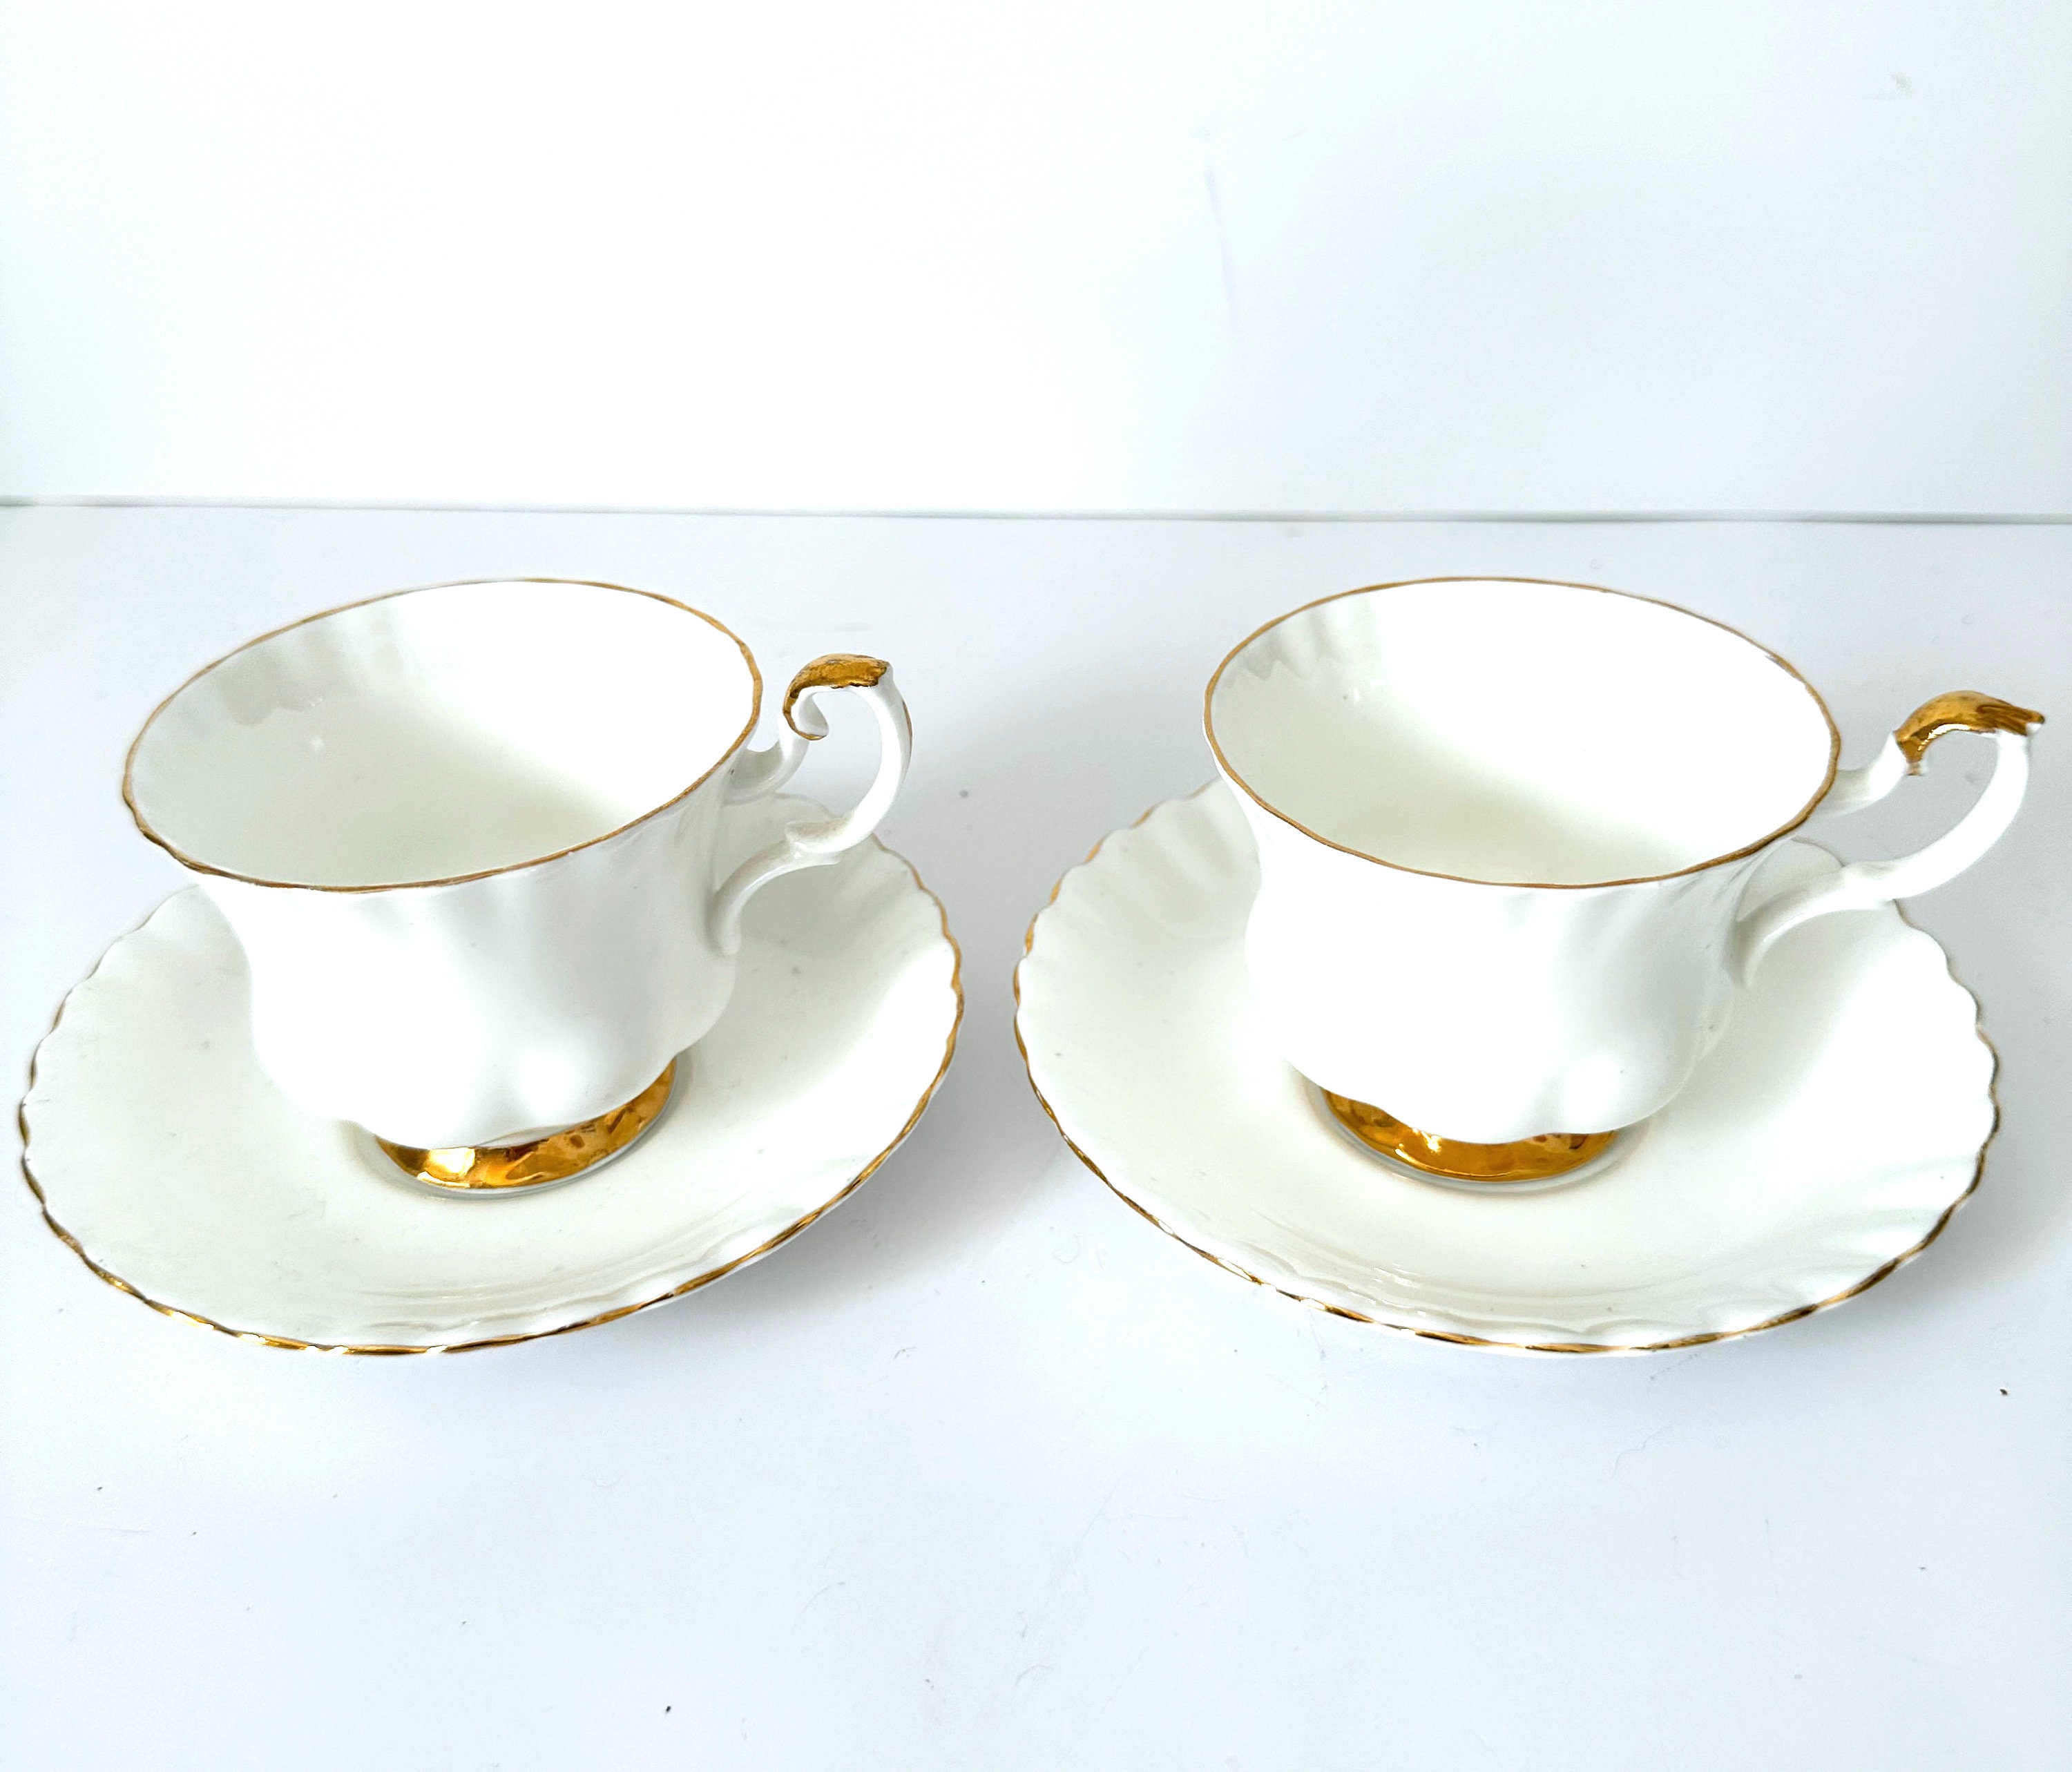 White Empty Tea Cup And Saucer With Simple Pattern Isolated On